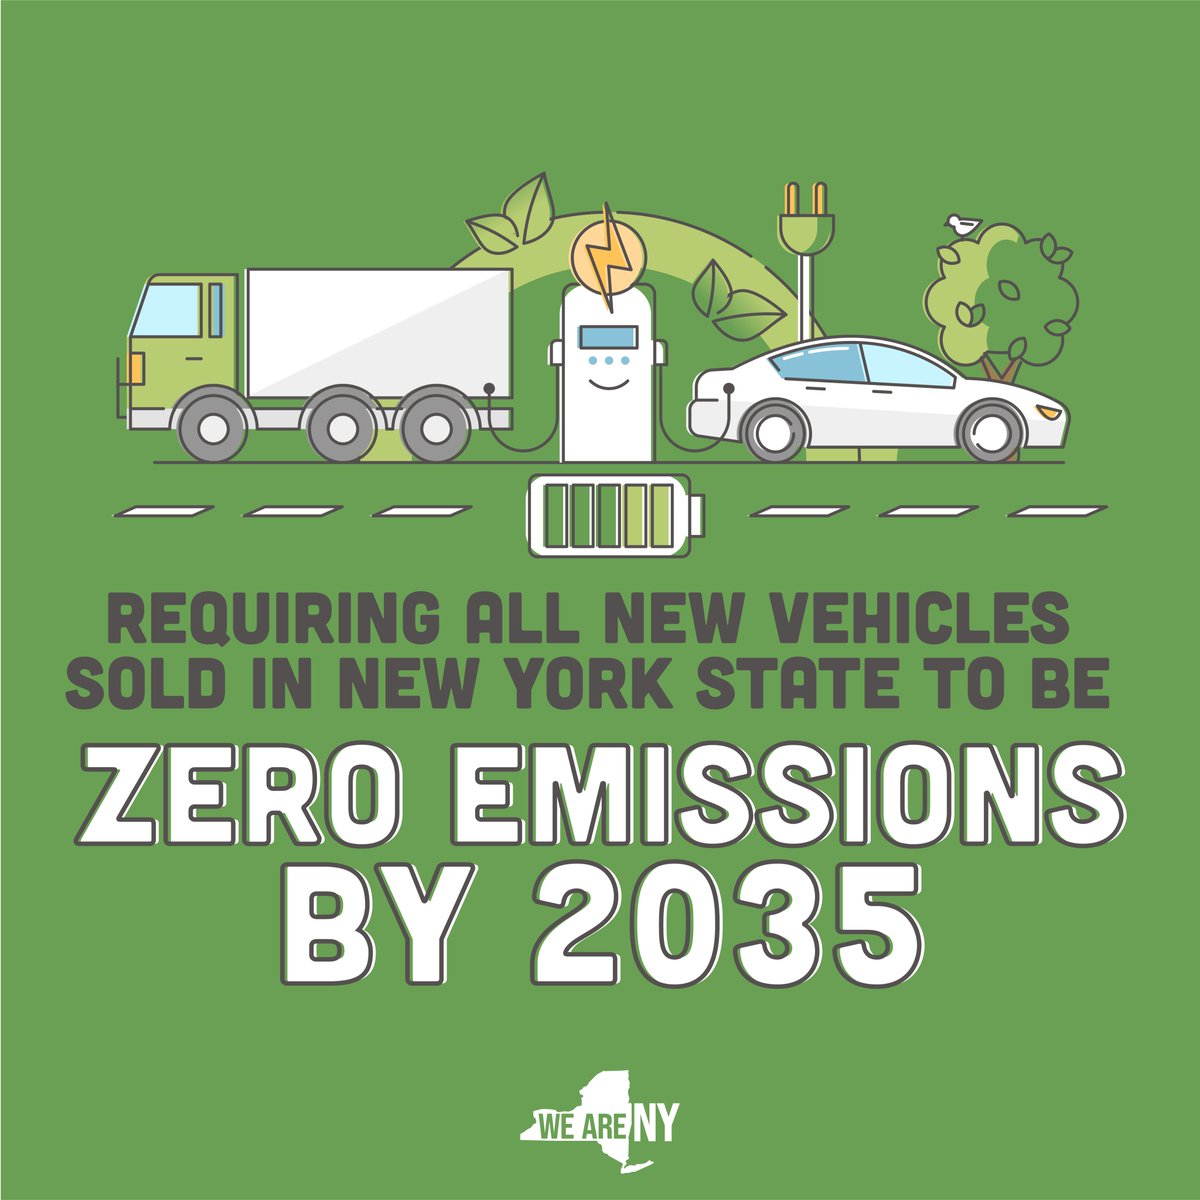 NEW: All new vehicles sold in New York must be zero emissions by 2035. By revving up our clean transportation transition and making major investments to make EVs more accessible, we’re supercharging our fight against climate change. #NationalDriveElectricWeek